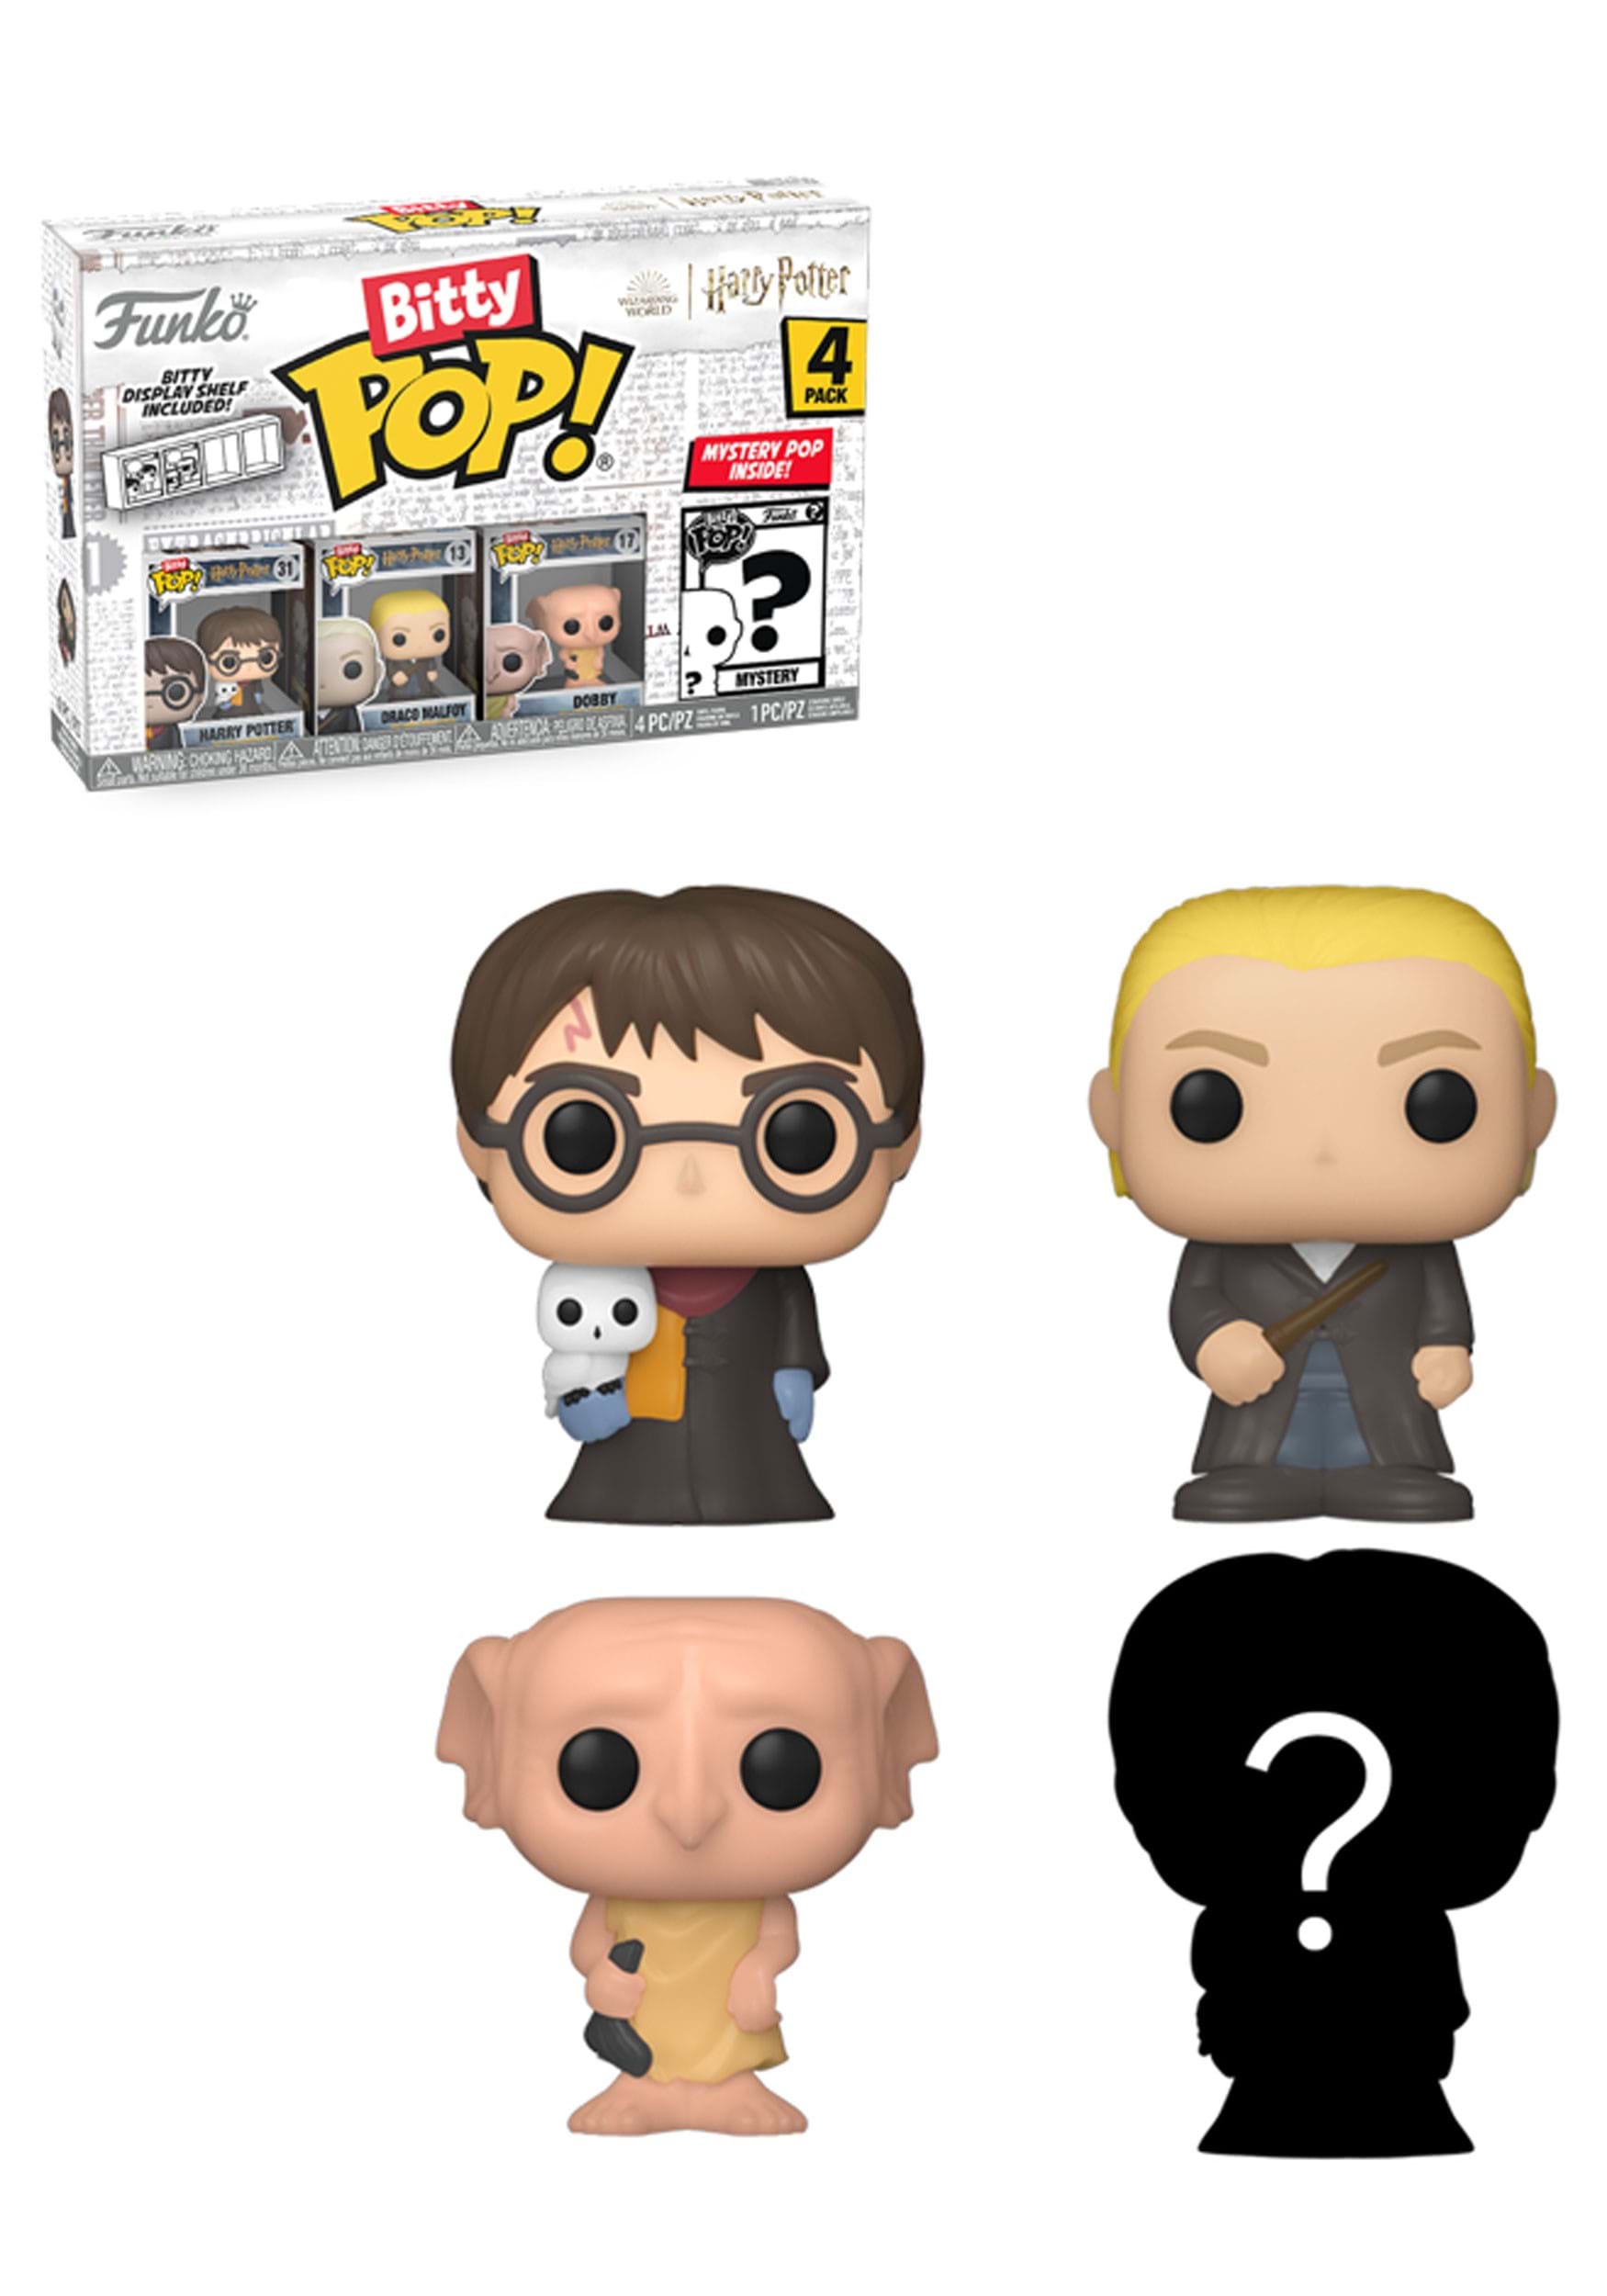 4-Pack Bitty POP! Harry Potter Series 1